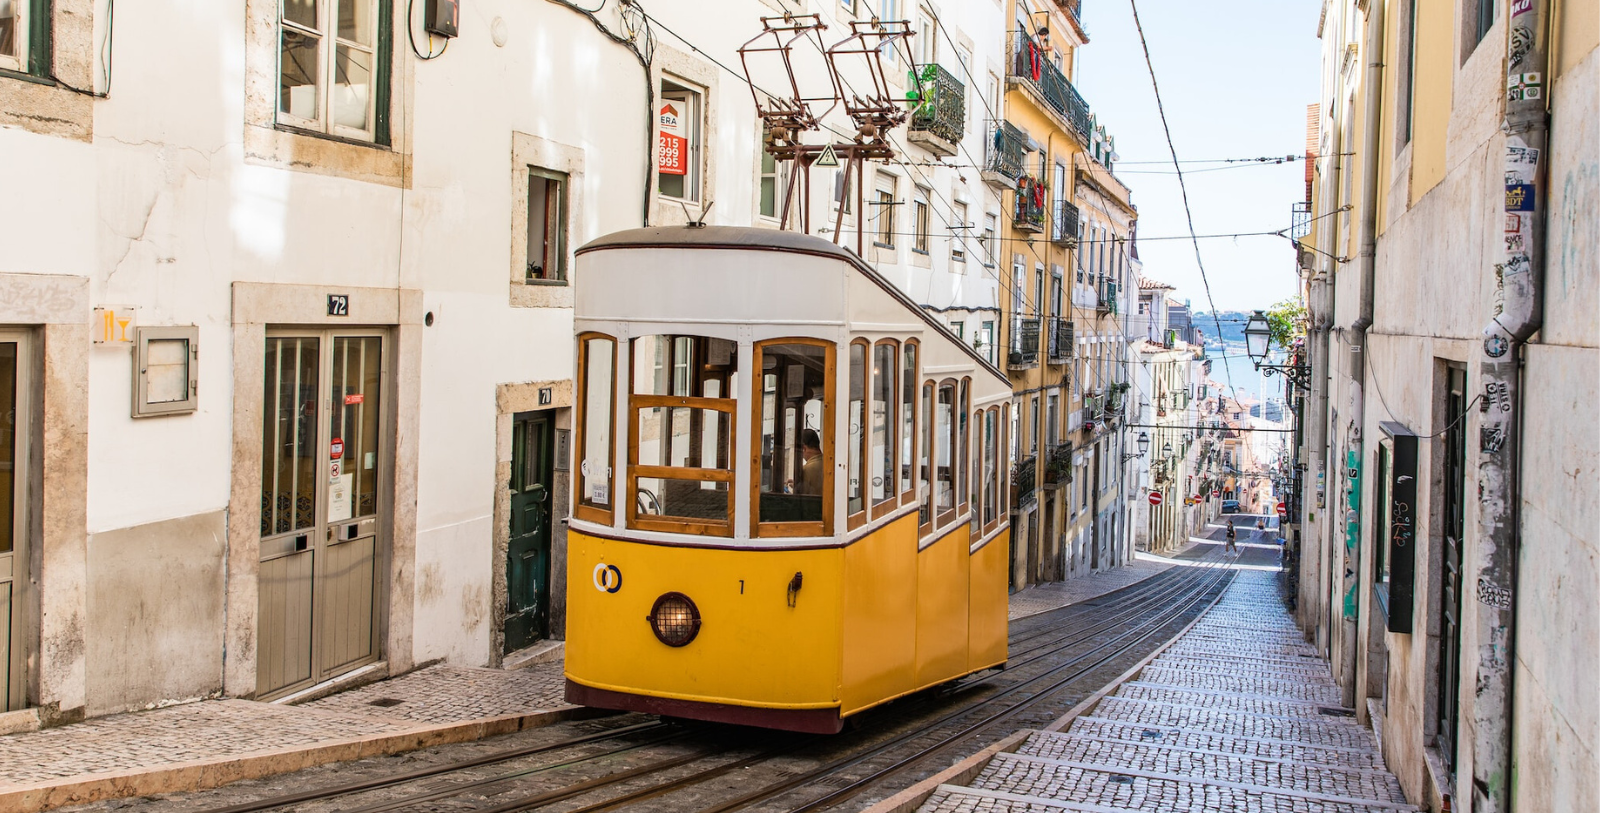 Experience a slice of Lisbon life from the iconic Tram 28, a canary-yellow electric tram that has been taking locals and travelers through some of the city’s most popular neighborhoods since 1901.